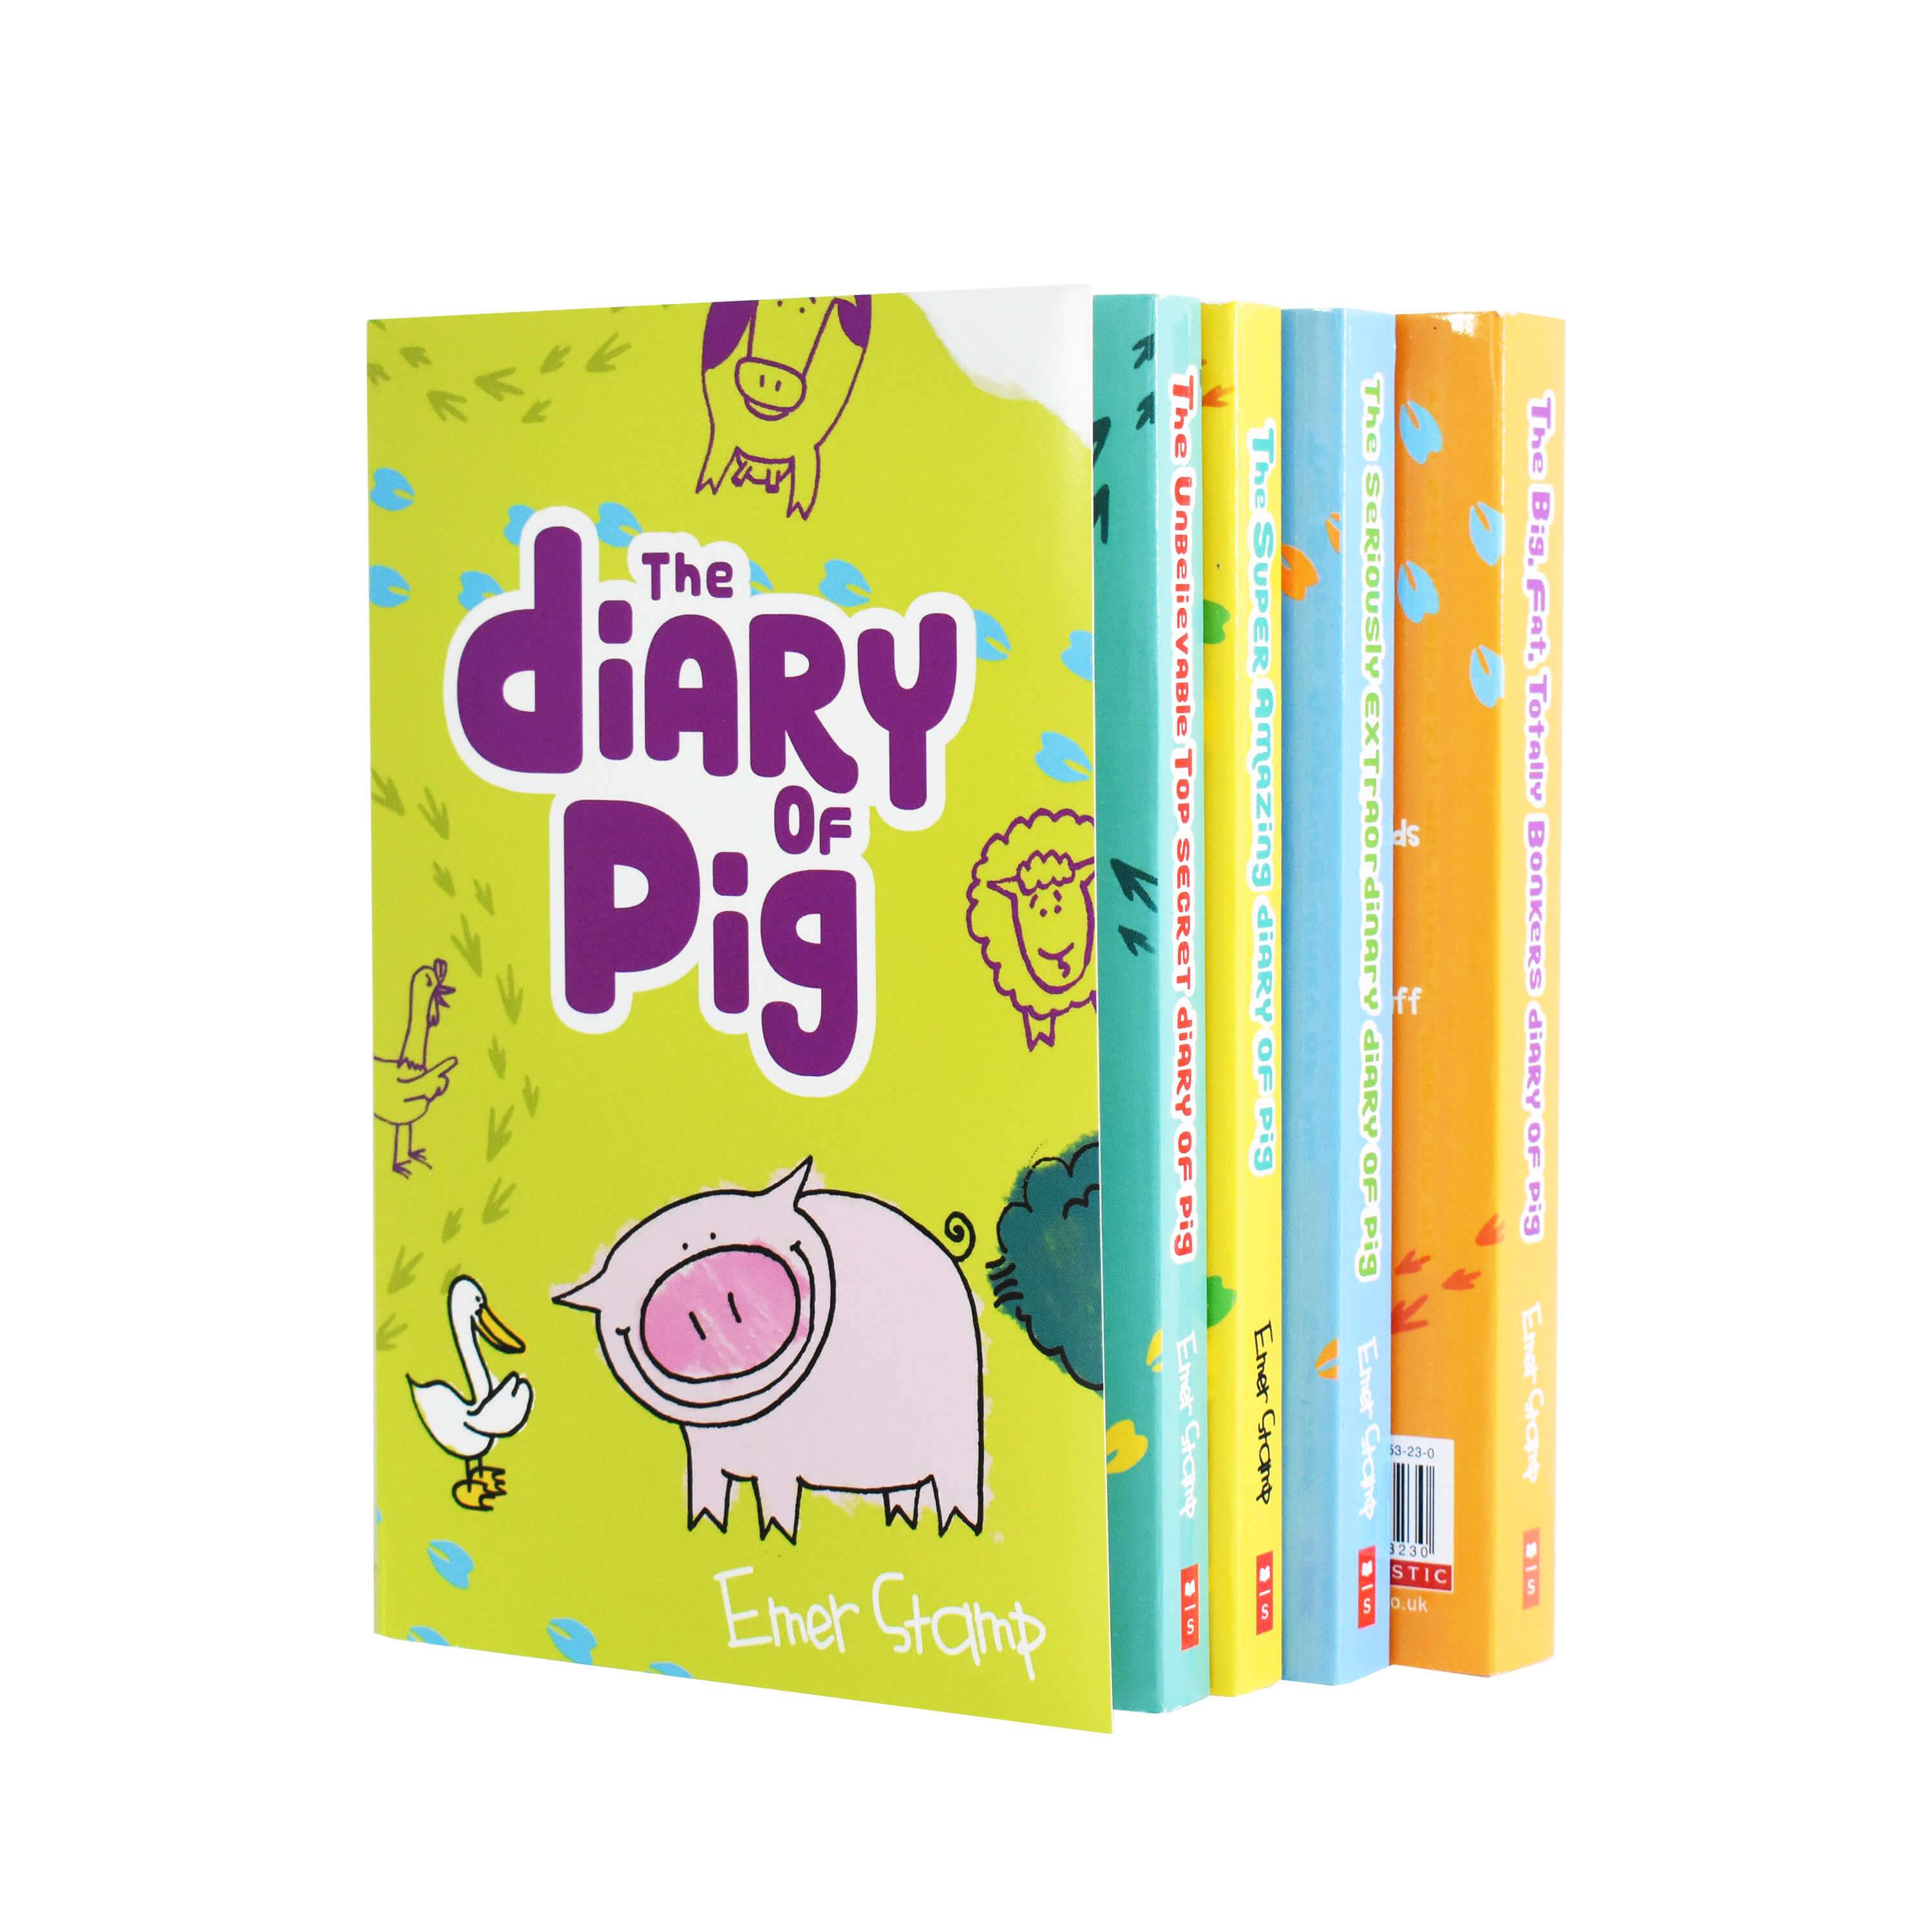 Pig　–　Stamp　Ages　Pa　8-11　Set　Stephens　Of　By　Diary　Books　St　The　Books　Collection　Emer